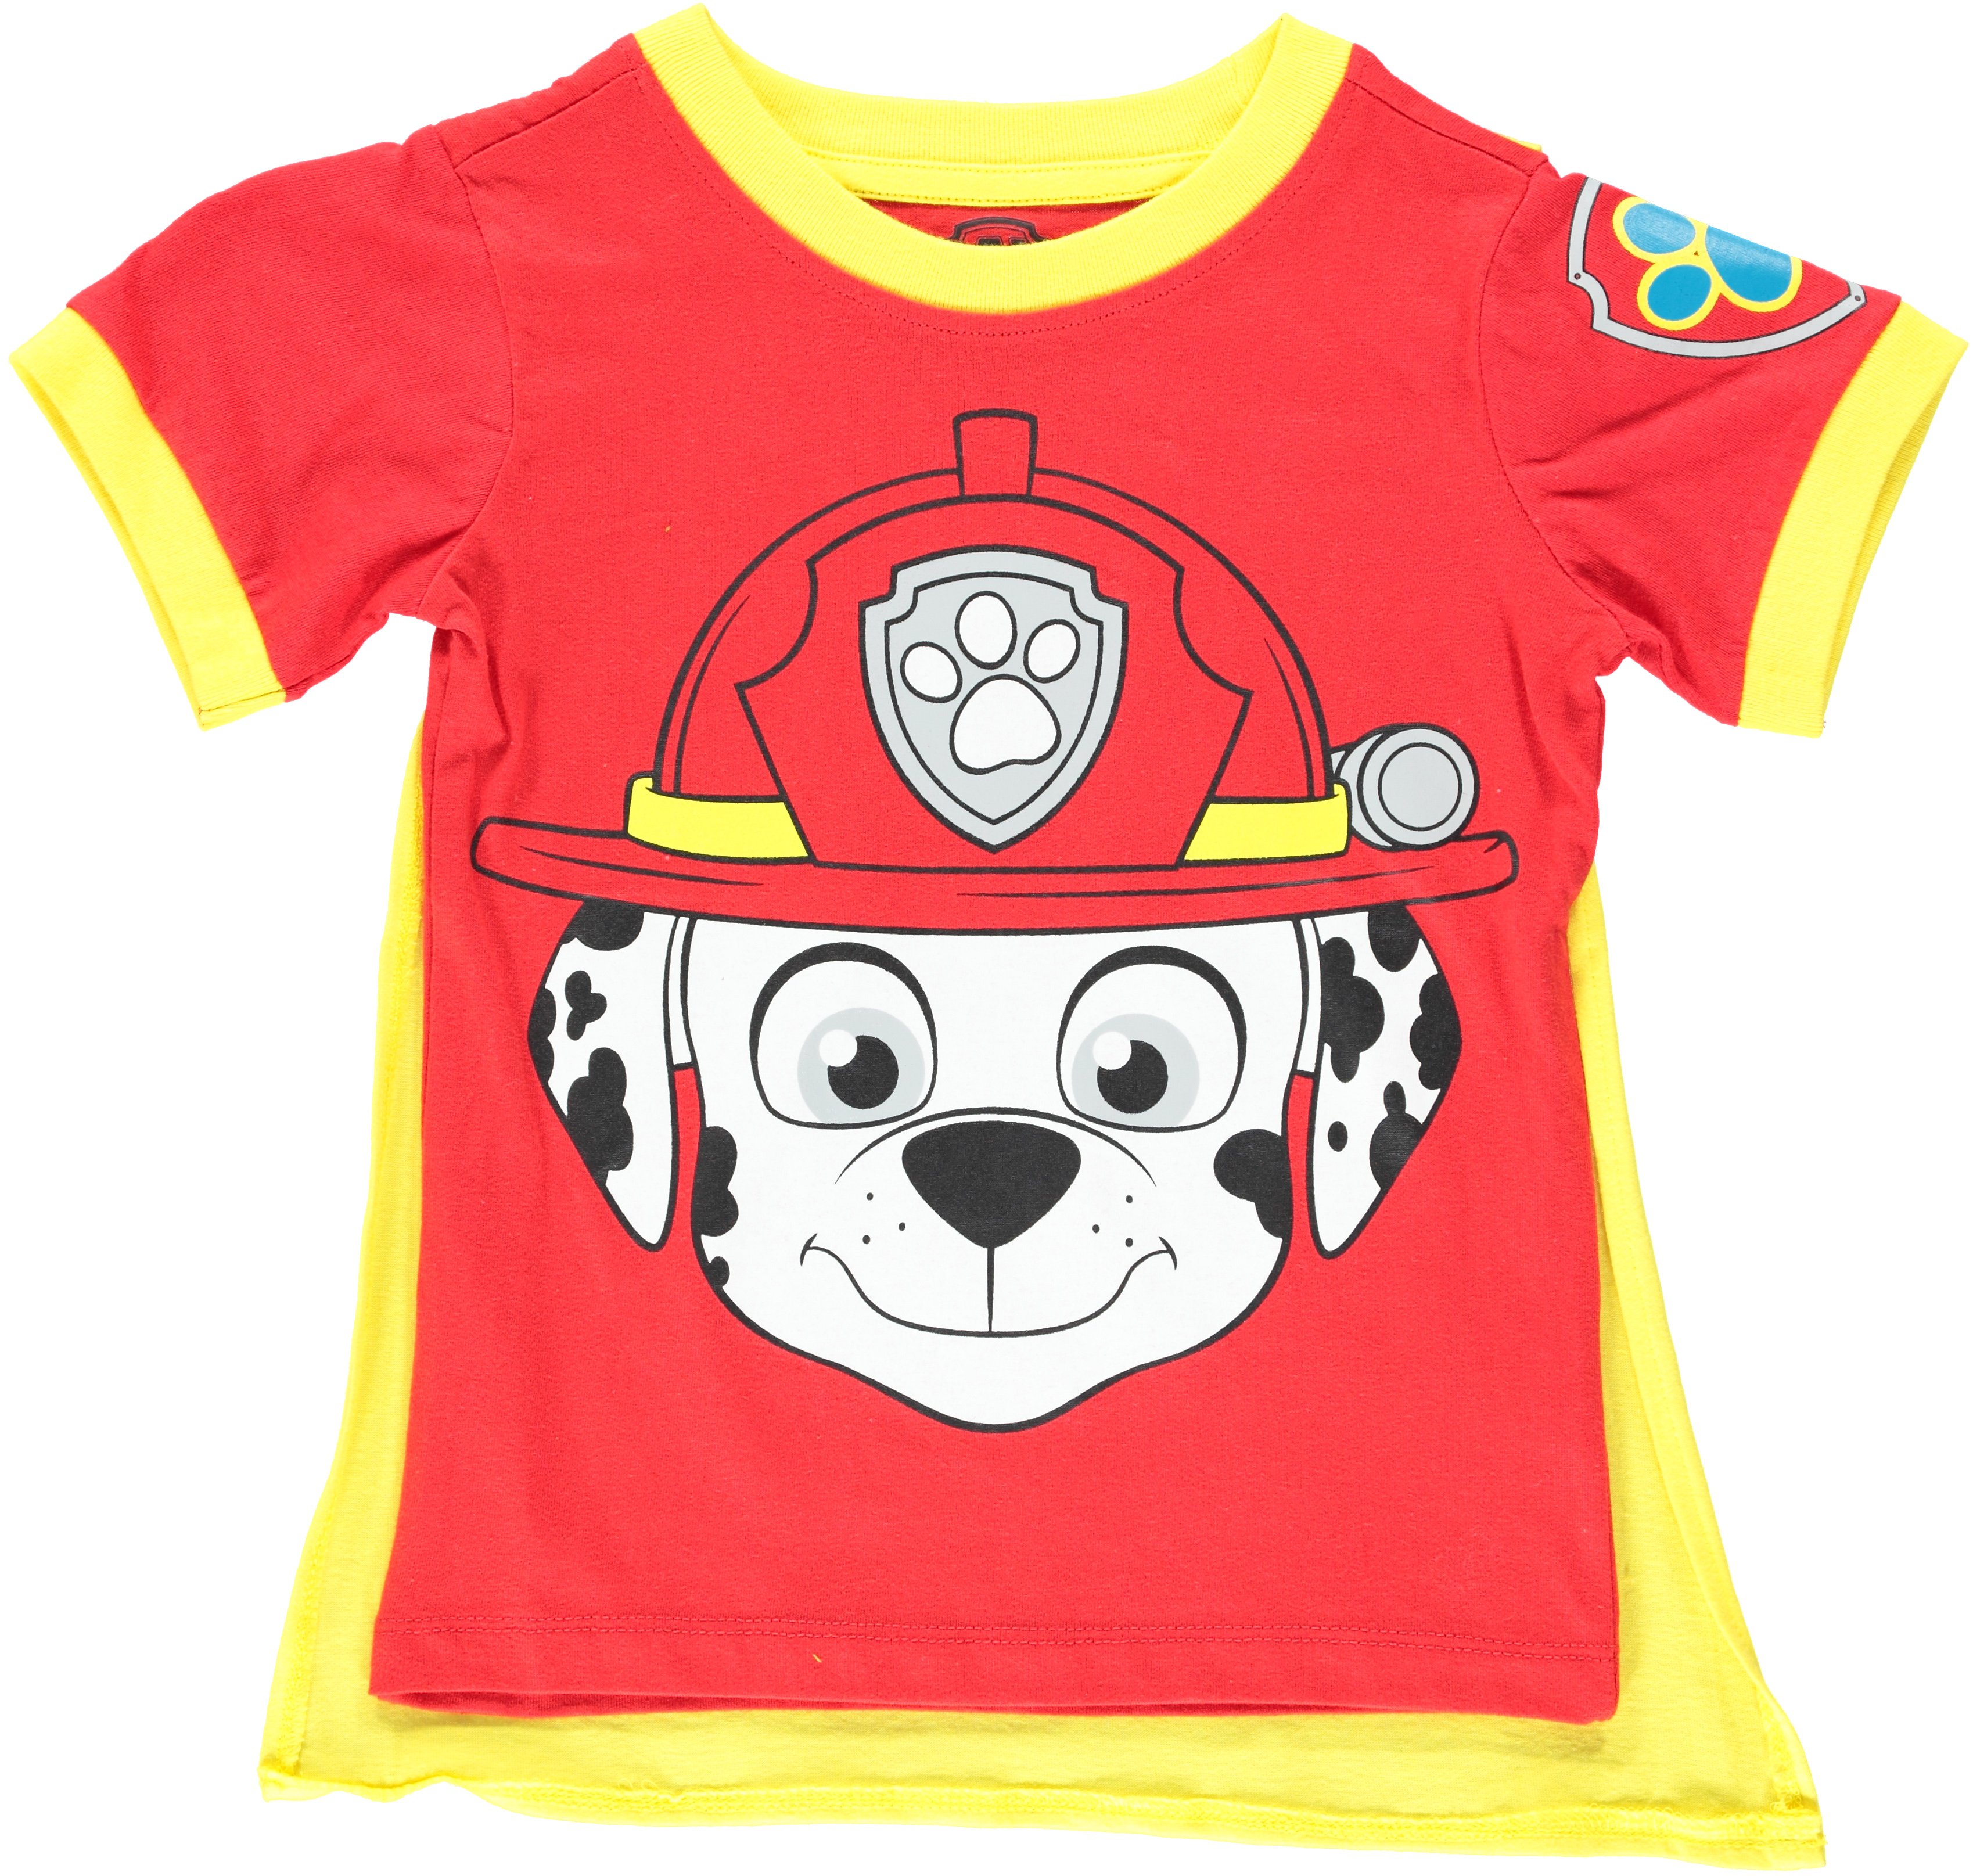 Details about   4T Nickolodeon Paw Patrol t-shirt yellow 